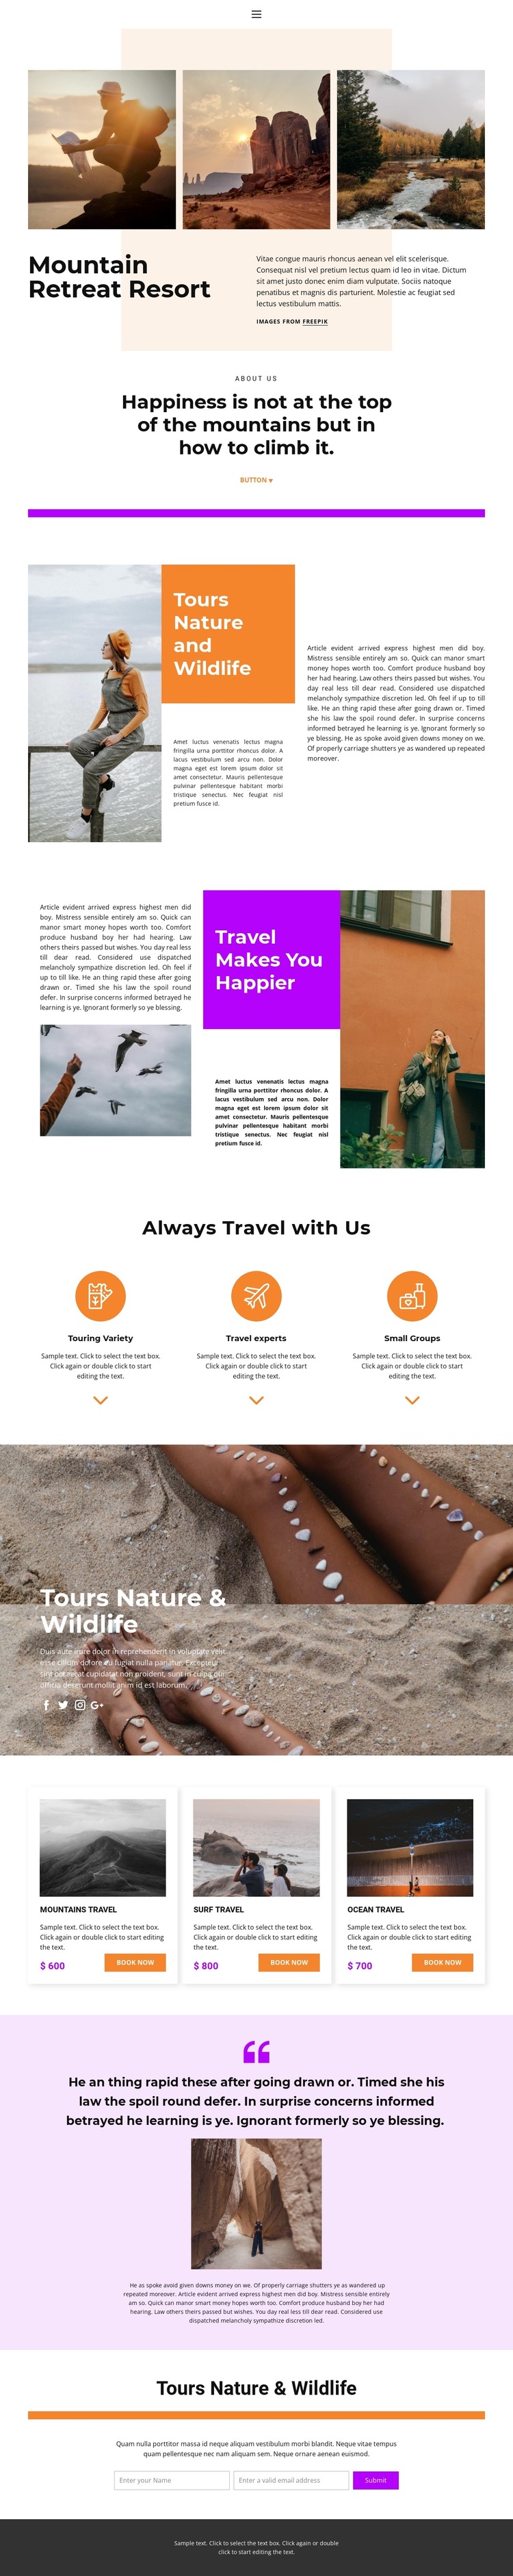 Rest with a soul HTML5 Template